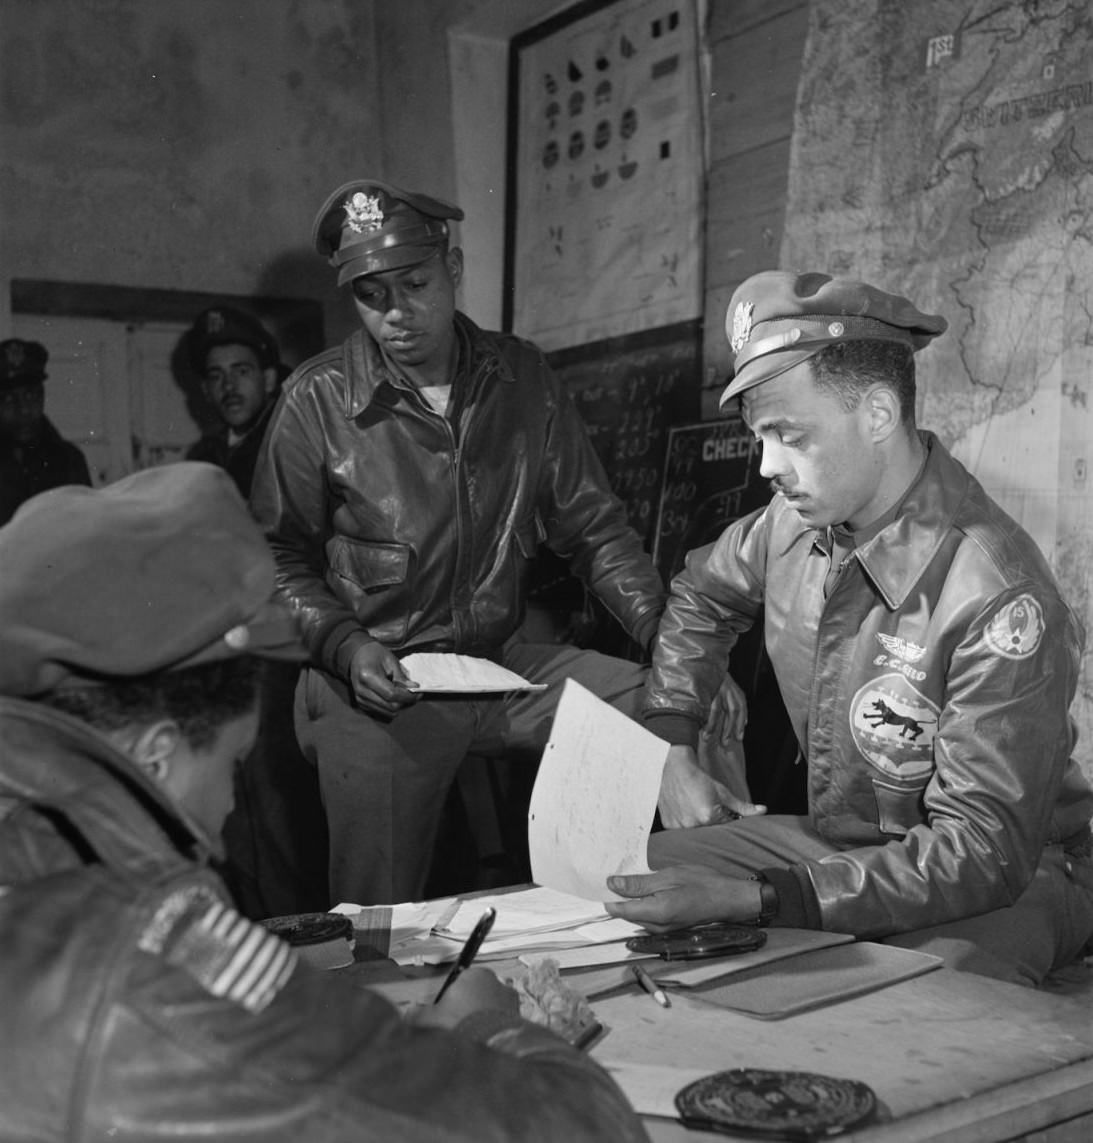 Tuskegee Airmen 332nd Fighter Group pilots.